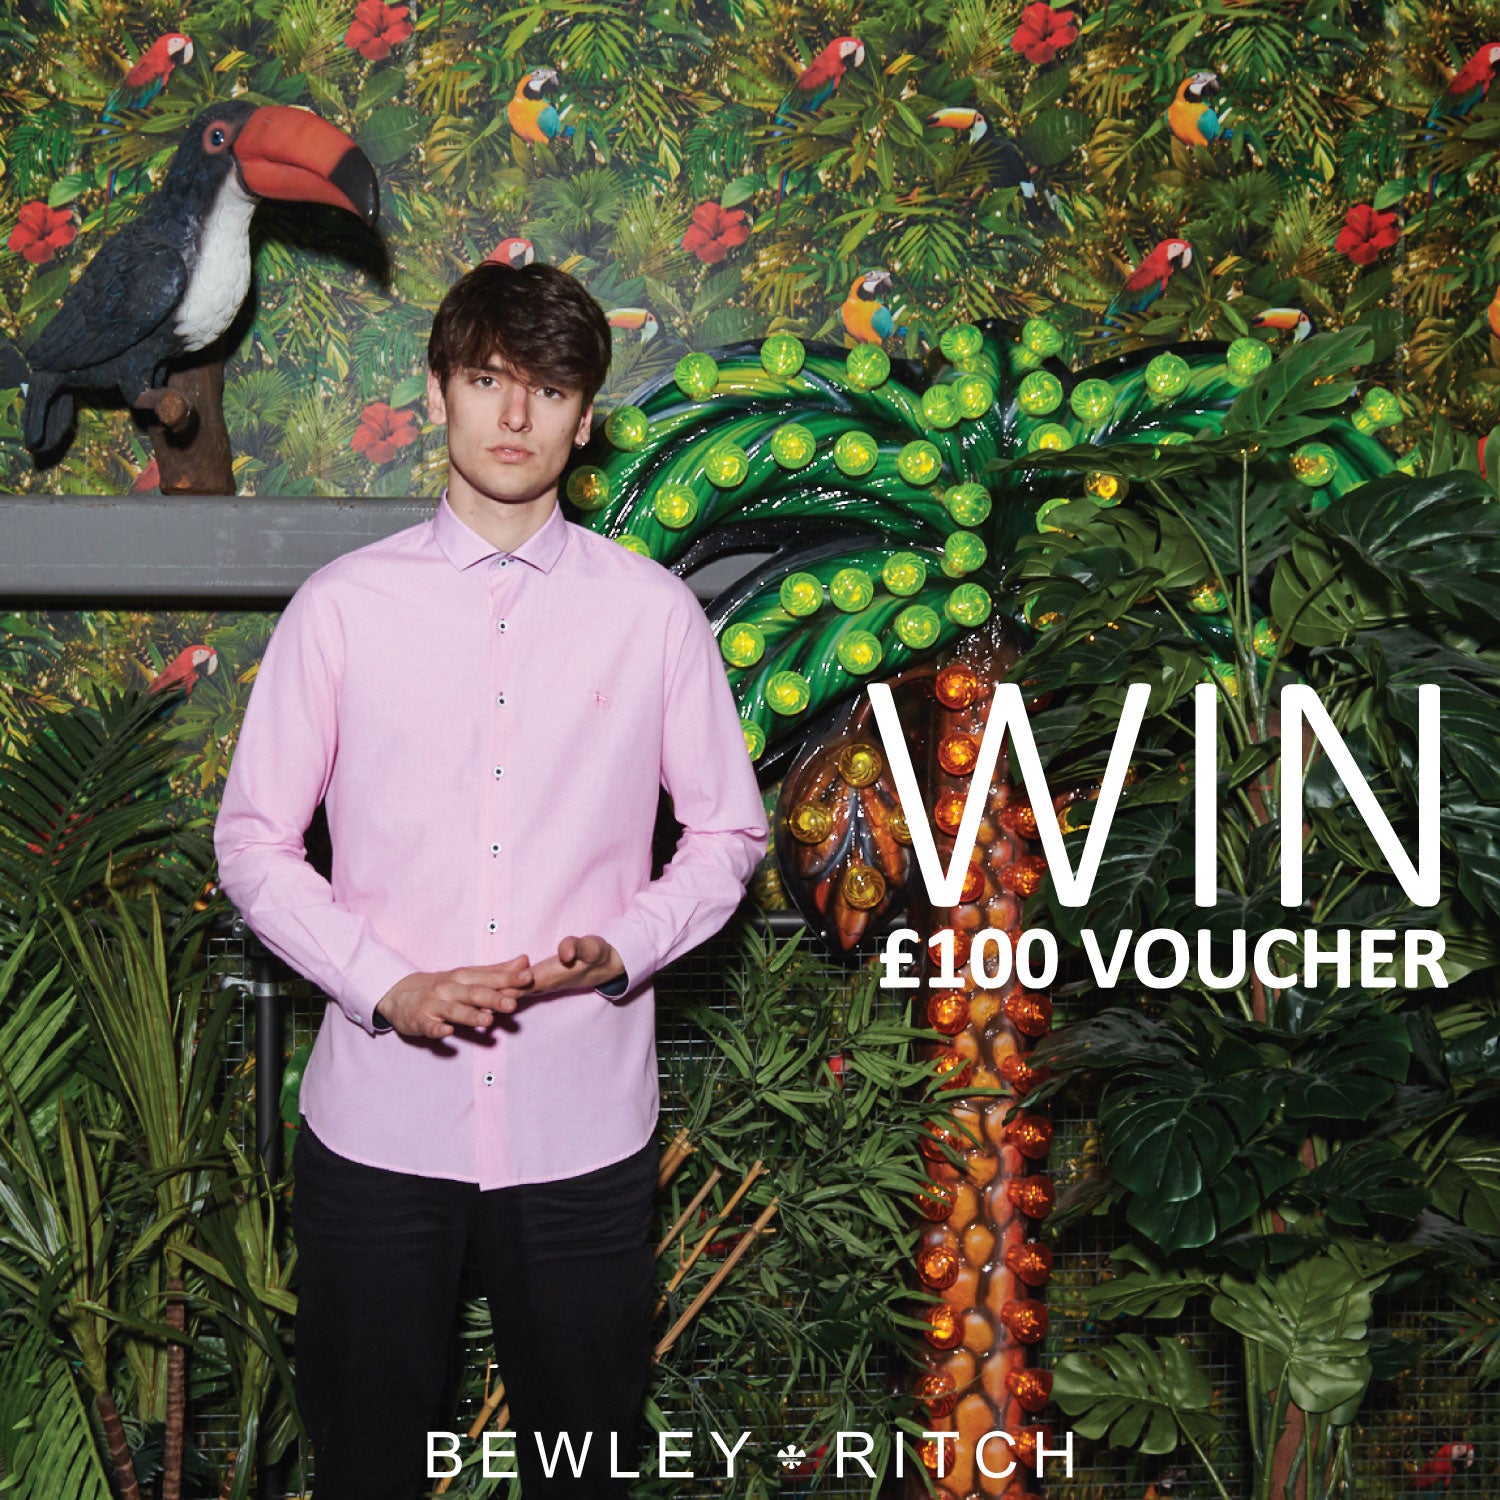 Competition: Win a £100 Voucher